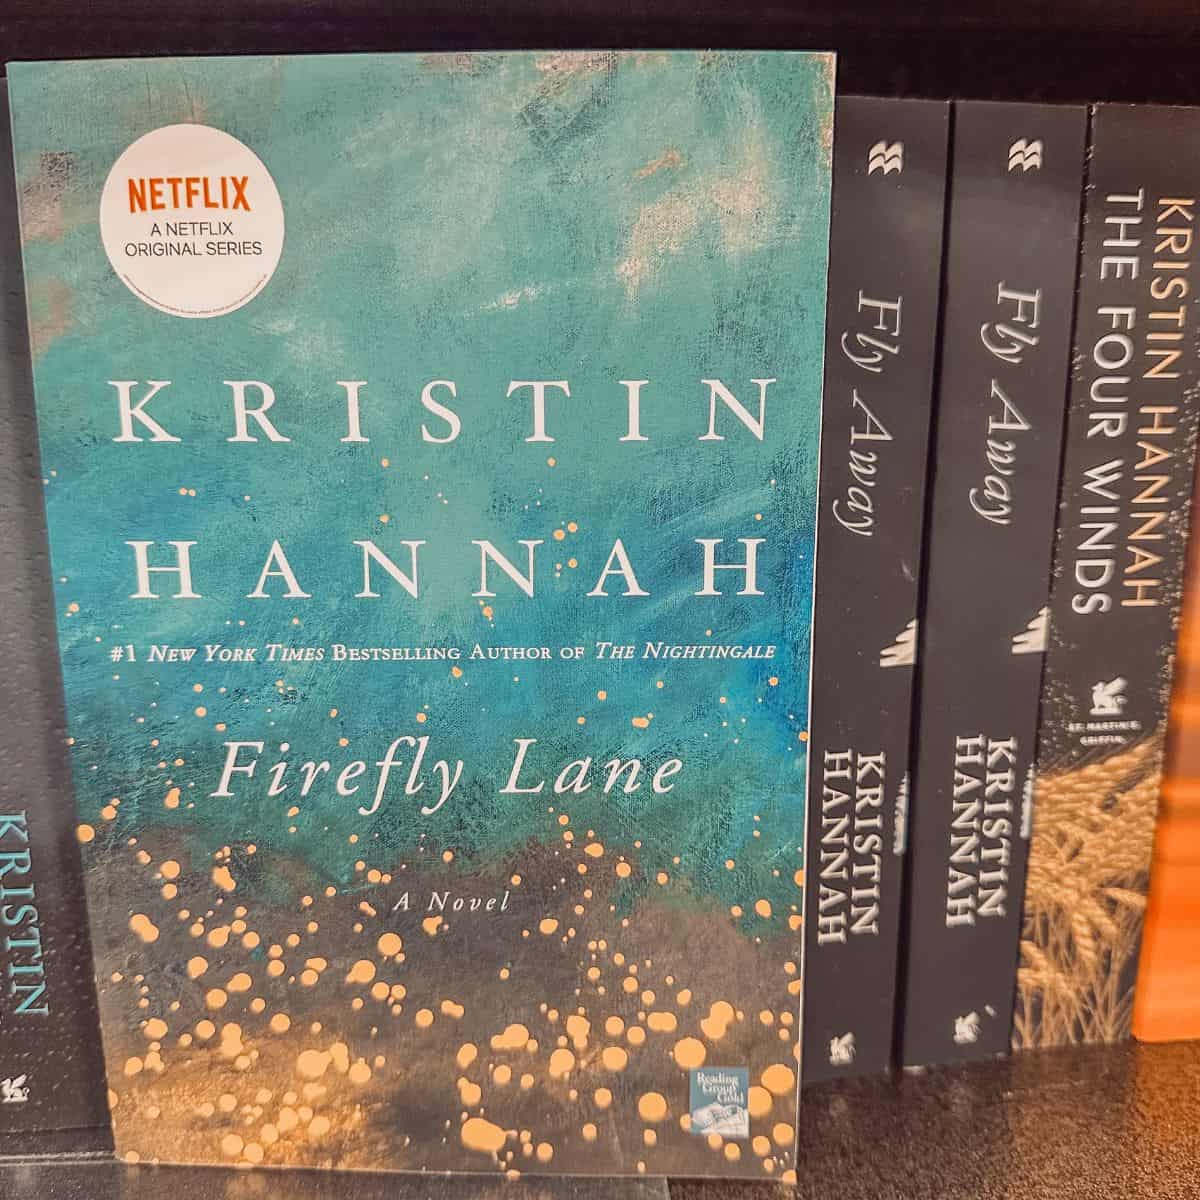 Firefly Lane and Fly Away by Kristin Hannah on a bookshelf.